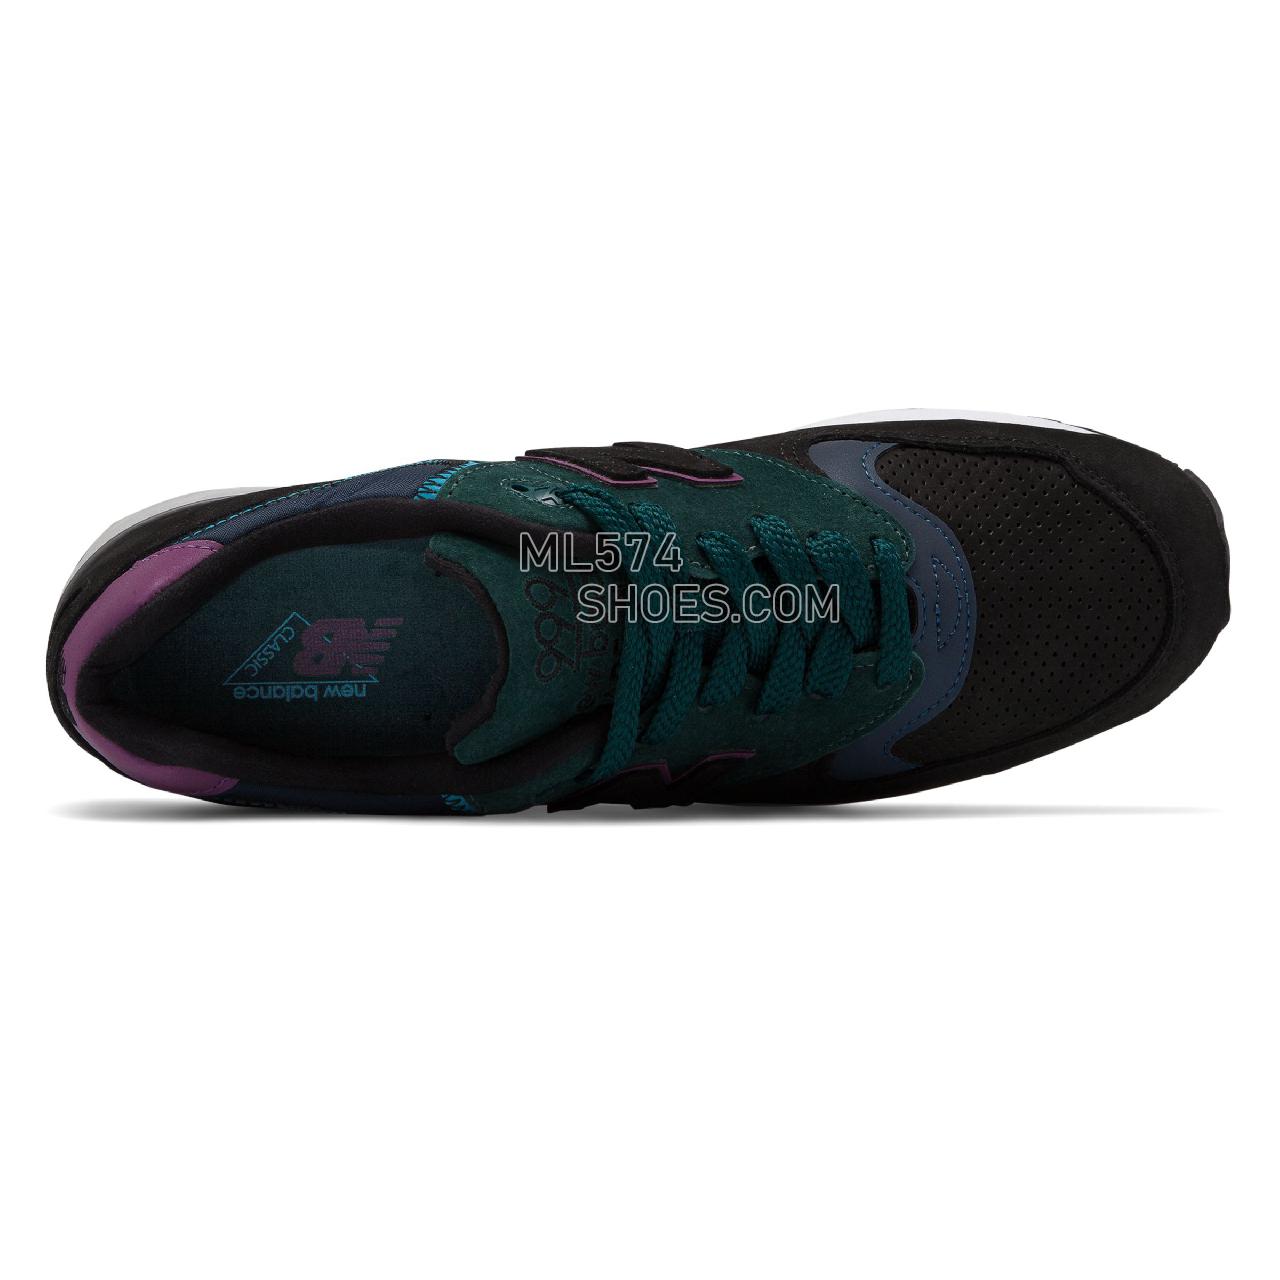 New Balance Made in US 999 - Men's 999 Made in US Classic M999-LEP - Black with Teal - M999JTB